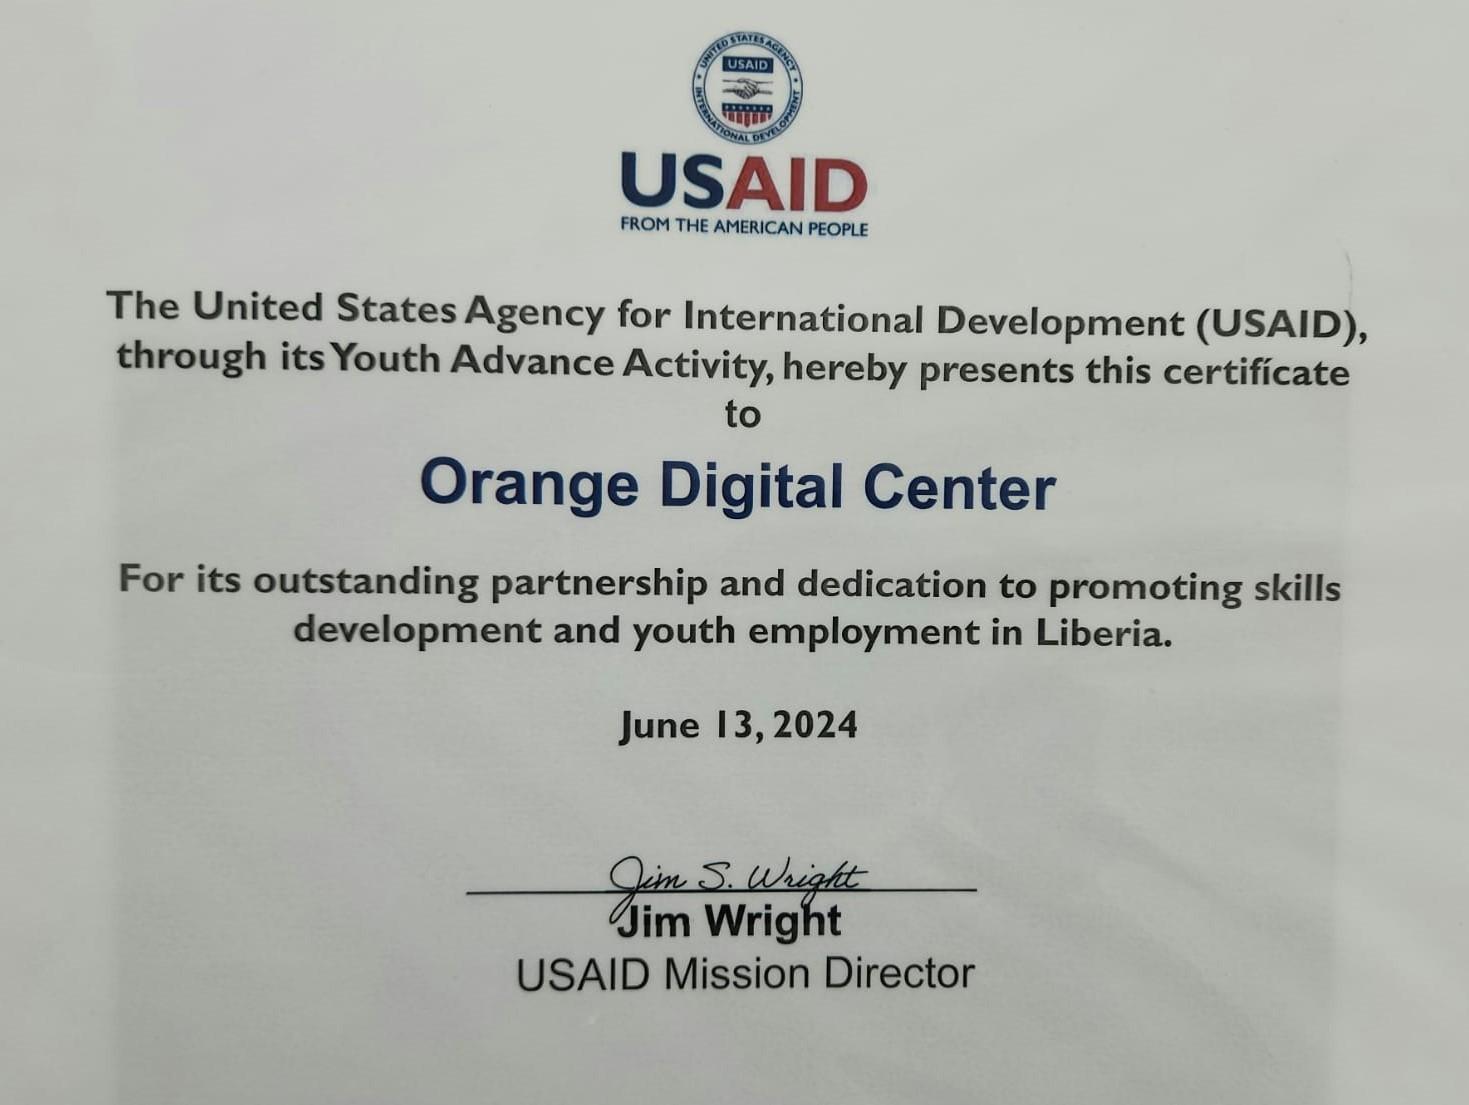 ODC Liberia gets recognization from United States Agency for International Development (USAID) for Youth Development Efforts in Liberia!